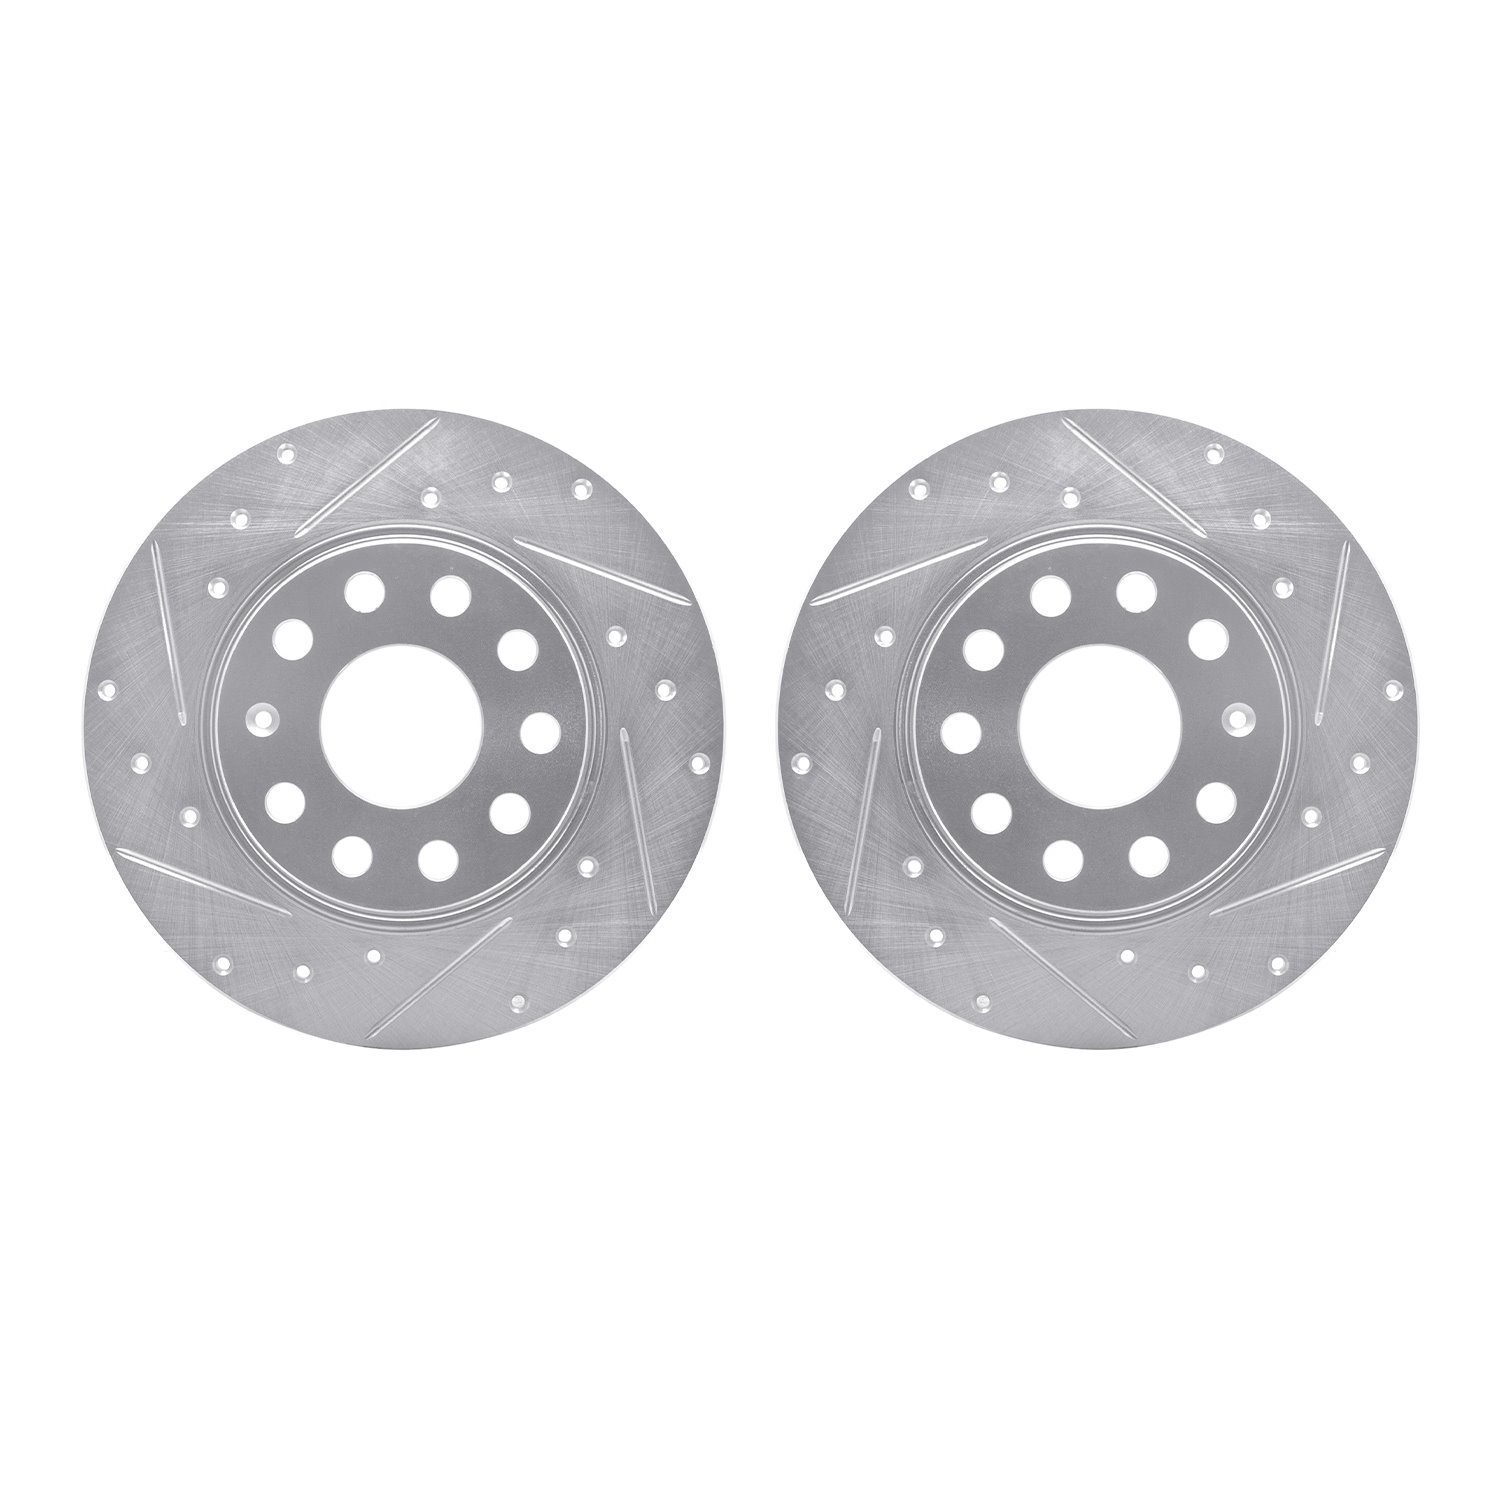 7002-74039 Drilled/Slotted Brake Rotors [Silver], Fits Select Multiple Makes/Models, Position: Rear